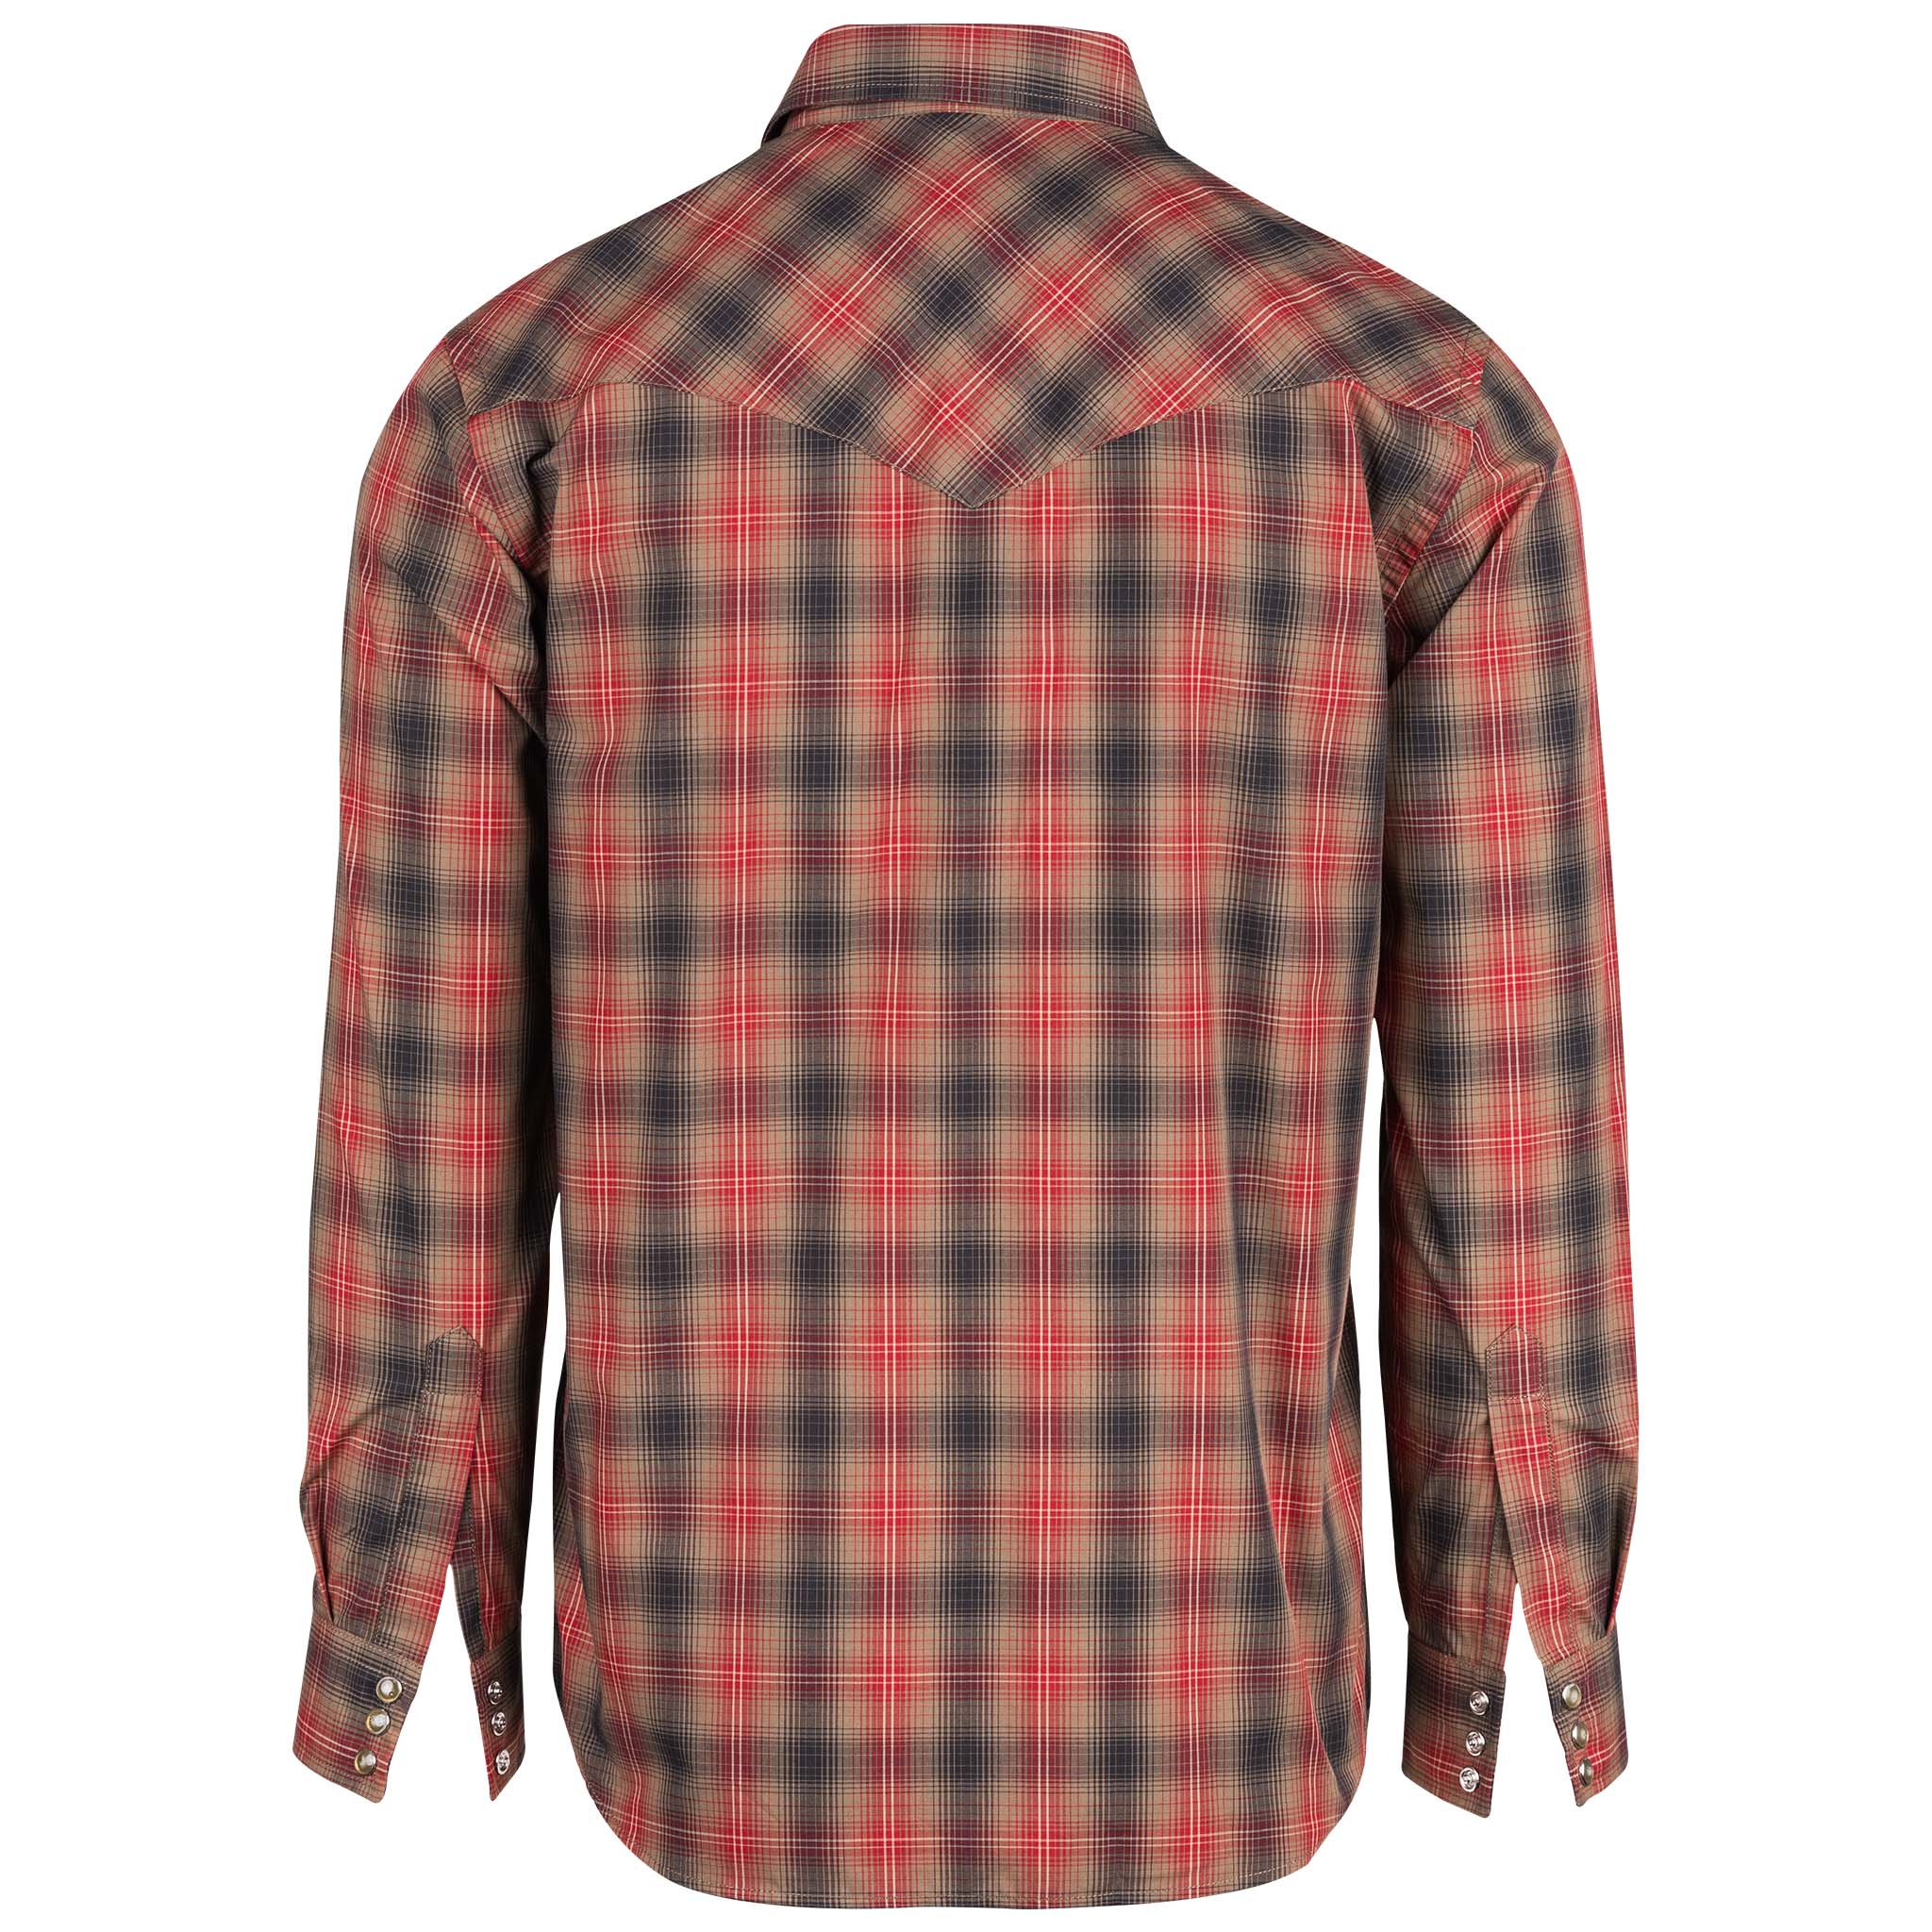 Frontier Shirt LS Brown Red Plaid 21